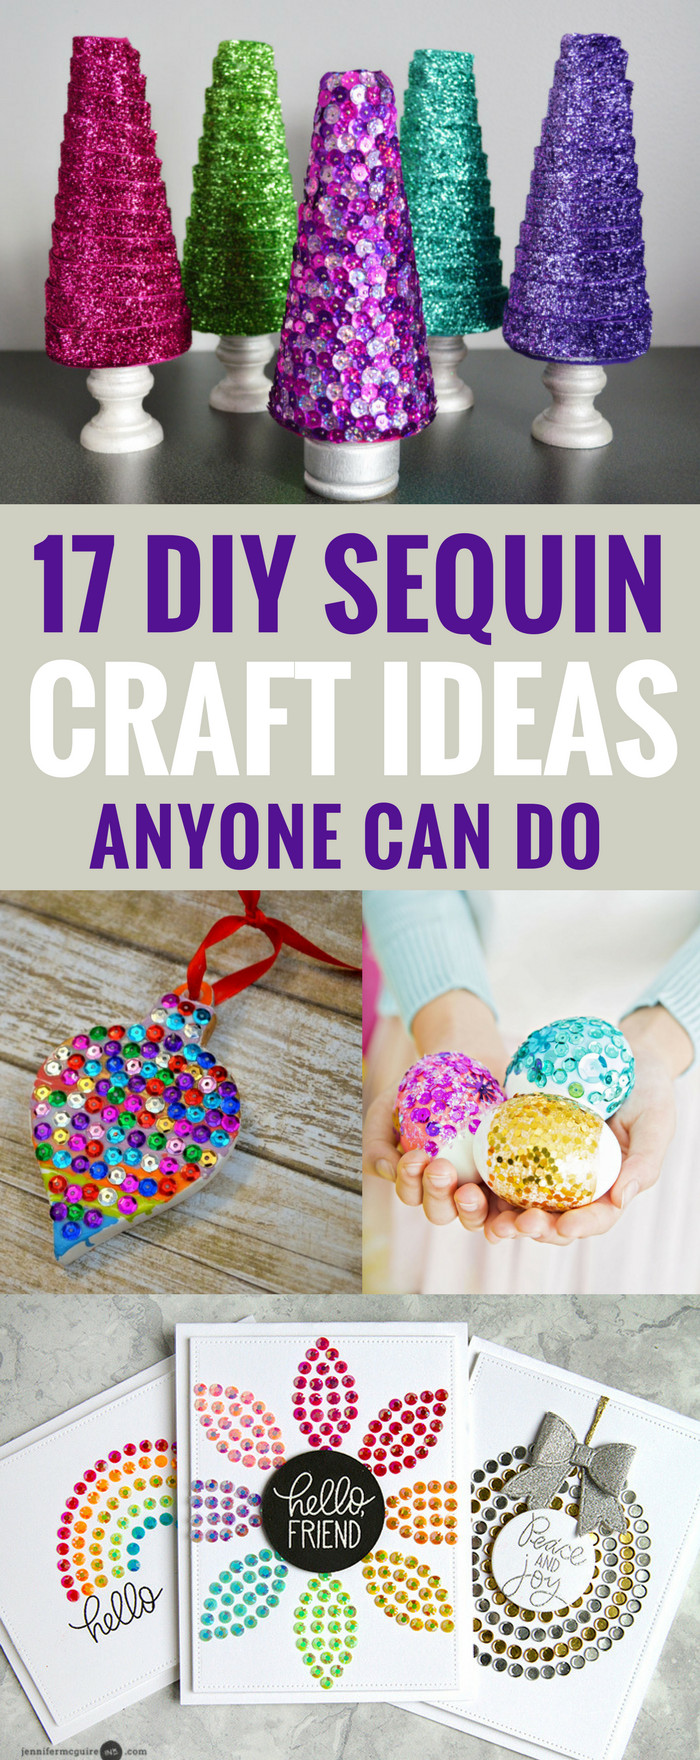 DIY Craft Projects For Kids
 17 DIY Sequin Crafts Ideas Anyone Can Do